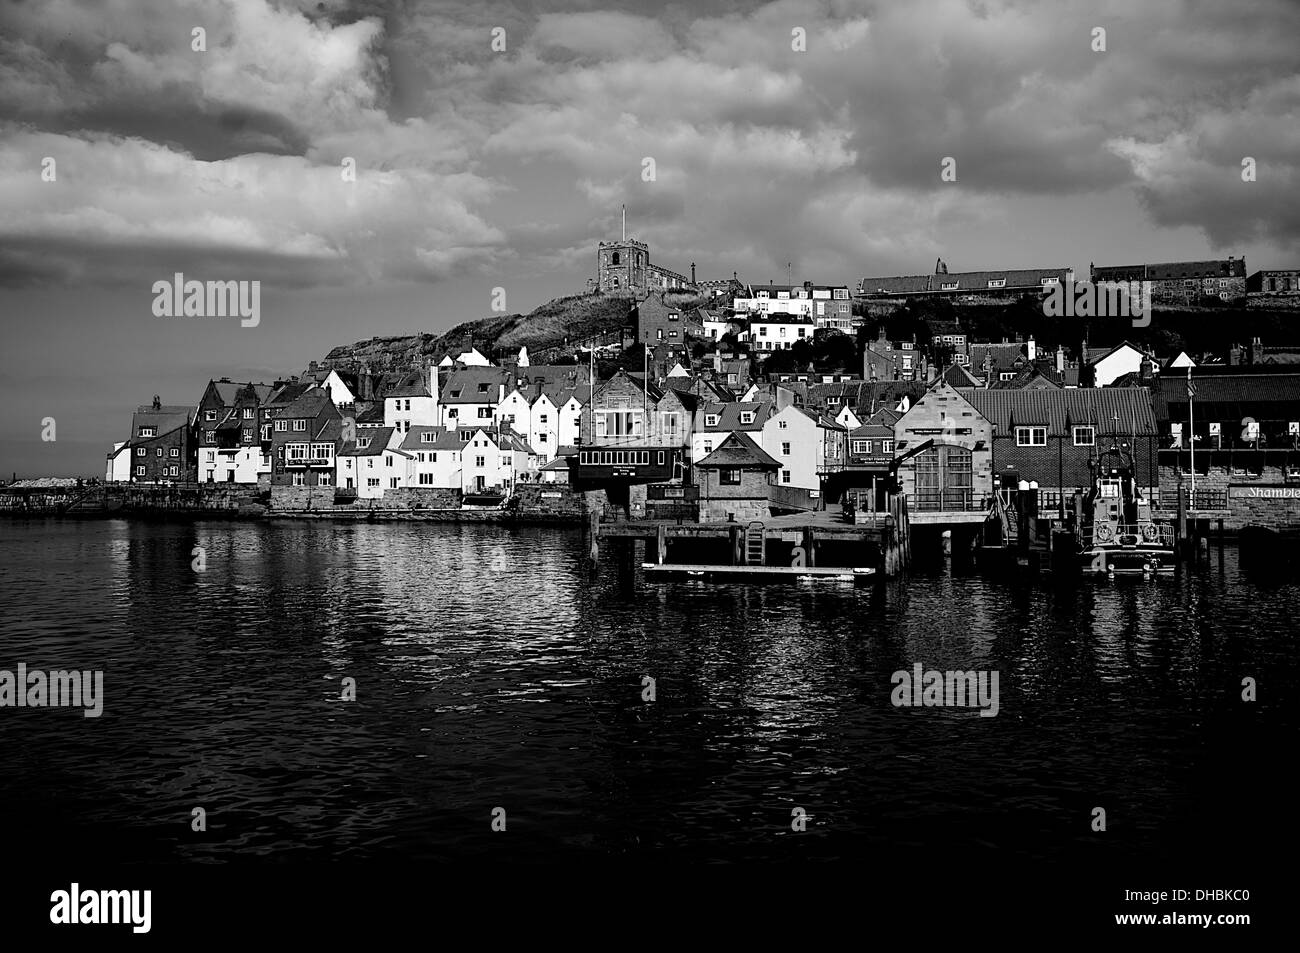 Black and white image of the harbour in the seaside town of Whitby, North Yorkshire, England. Stock Photo